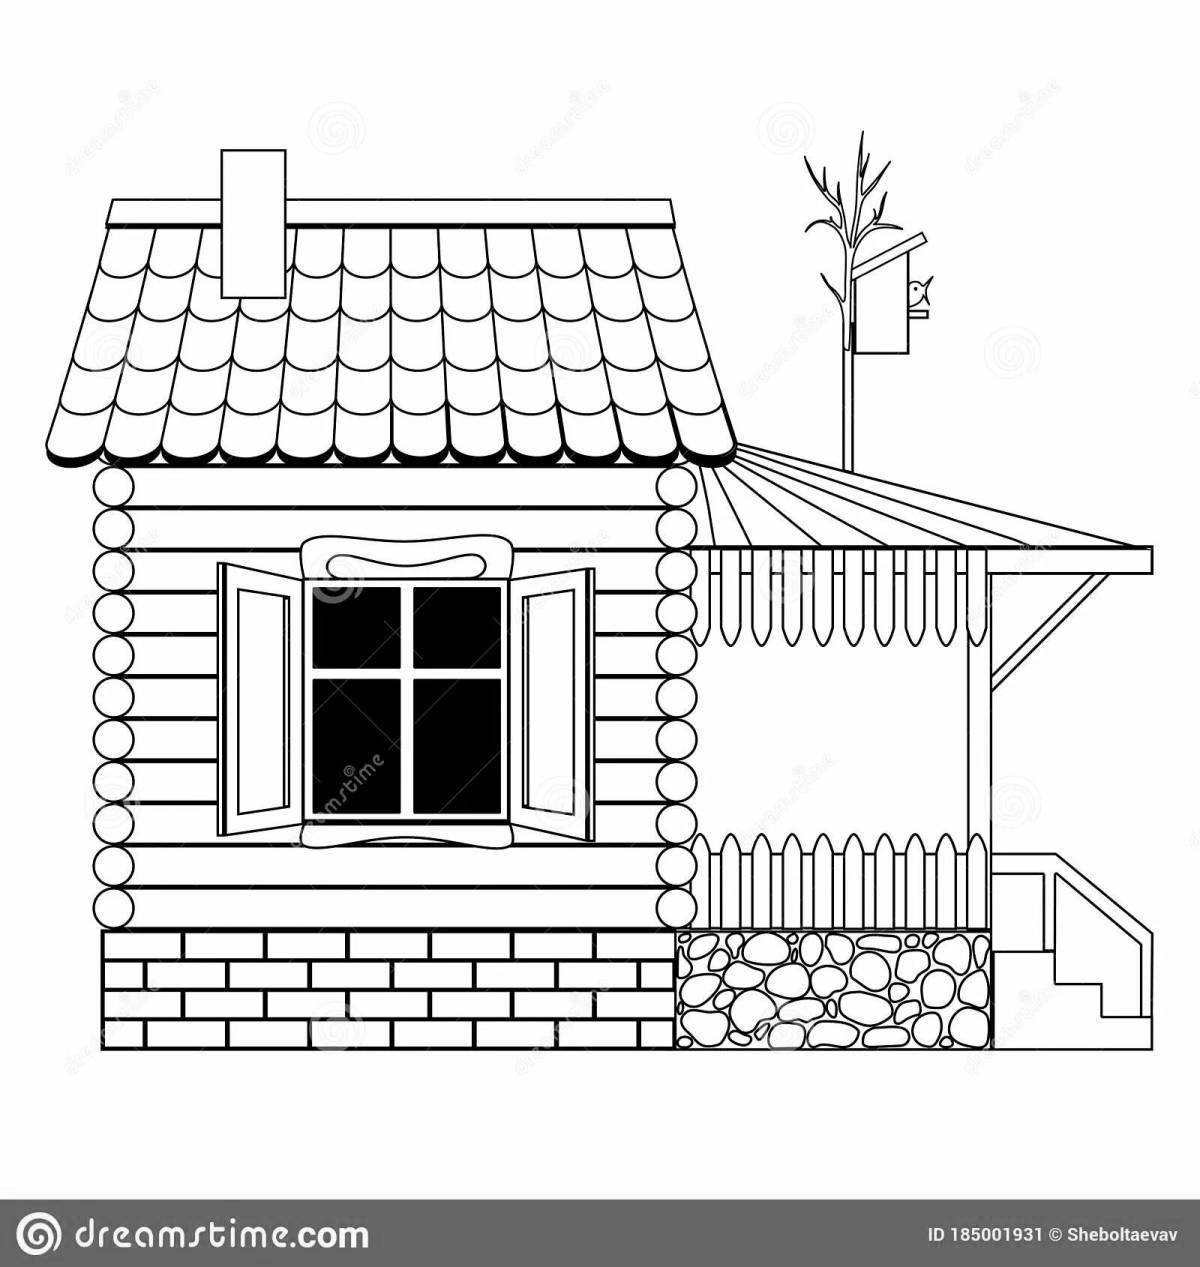 Coloring book shining roof of the house